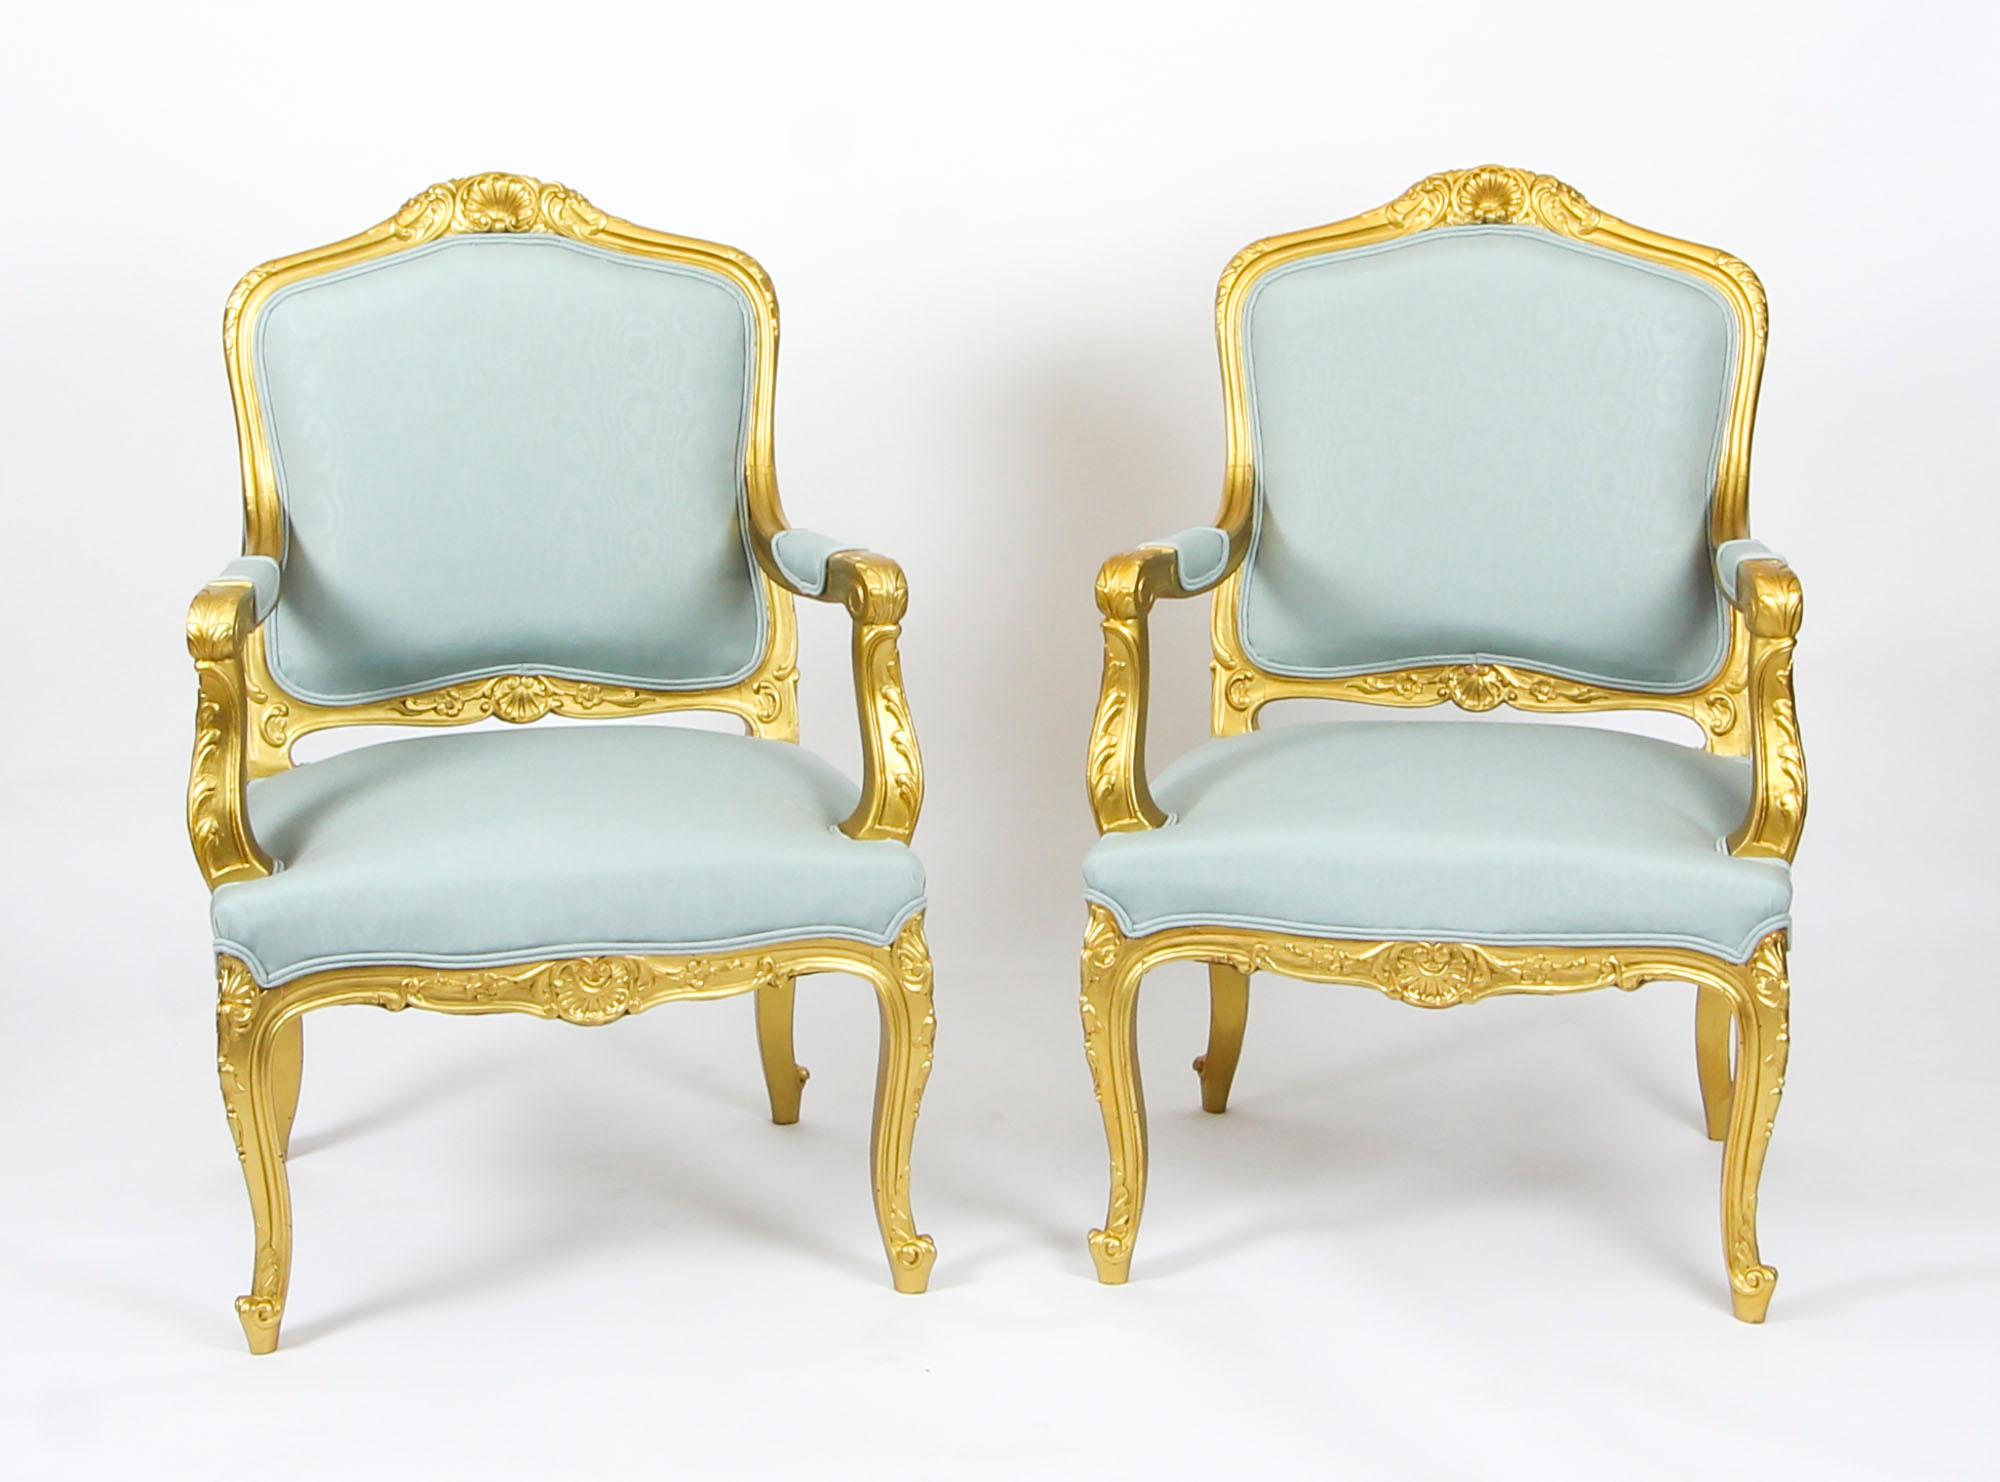 Louis XVI Antique Set of 4 Louis Revival French Giltwood Armchairs, 19th Century